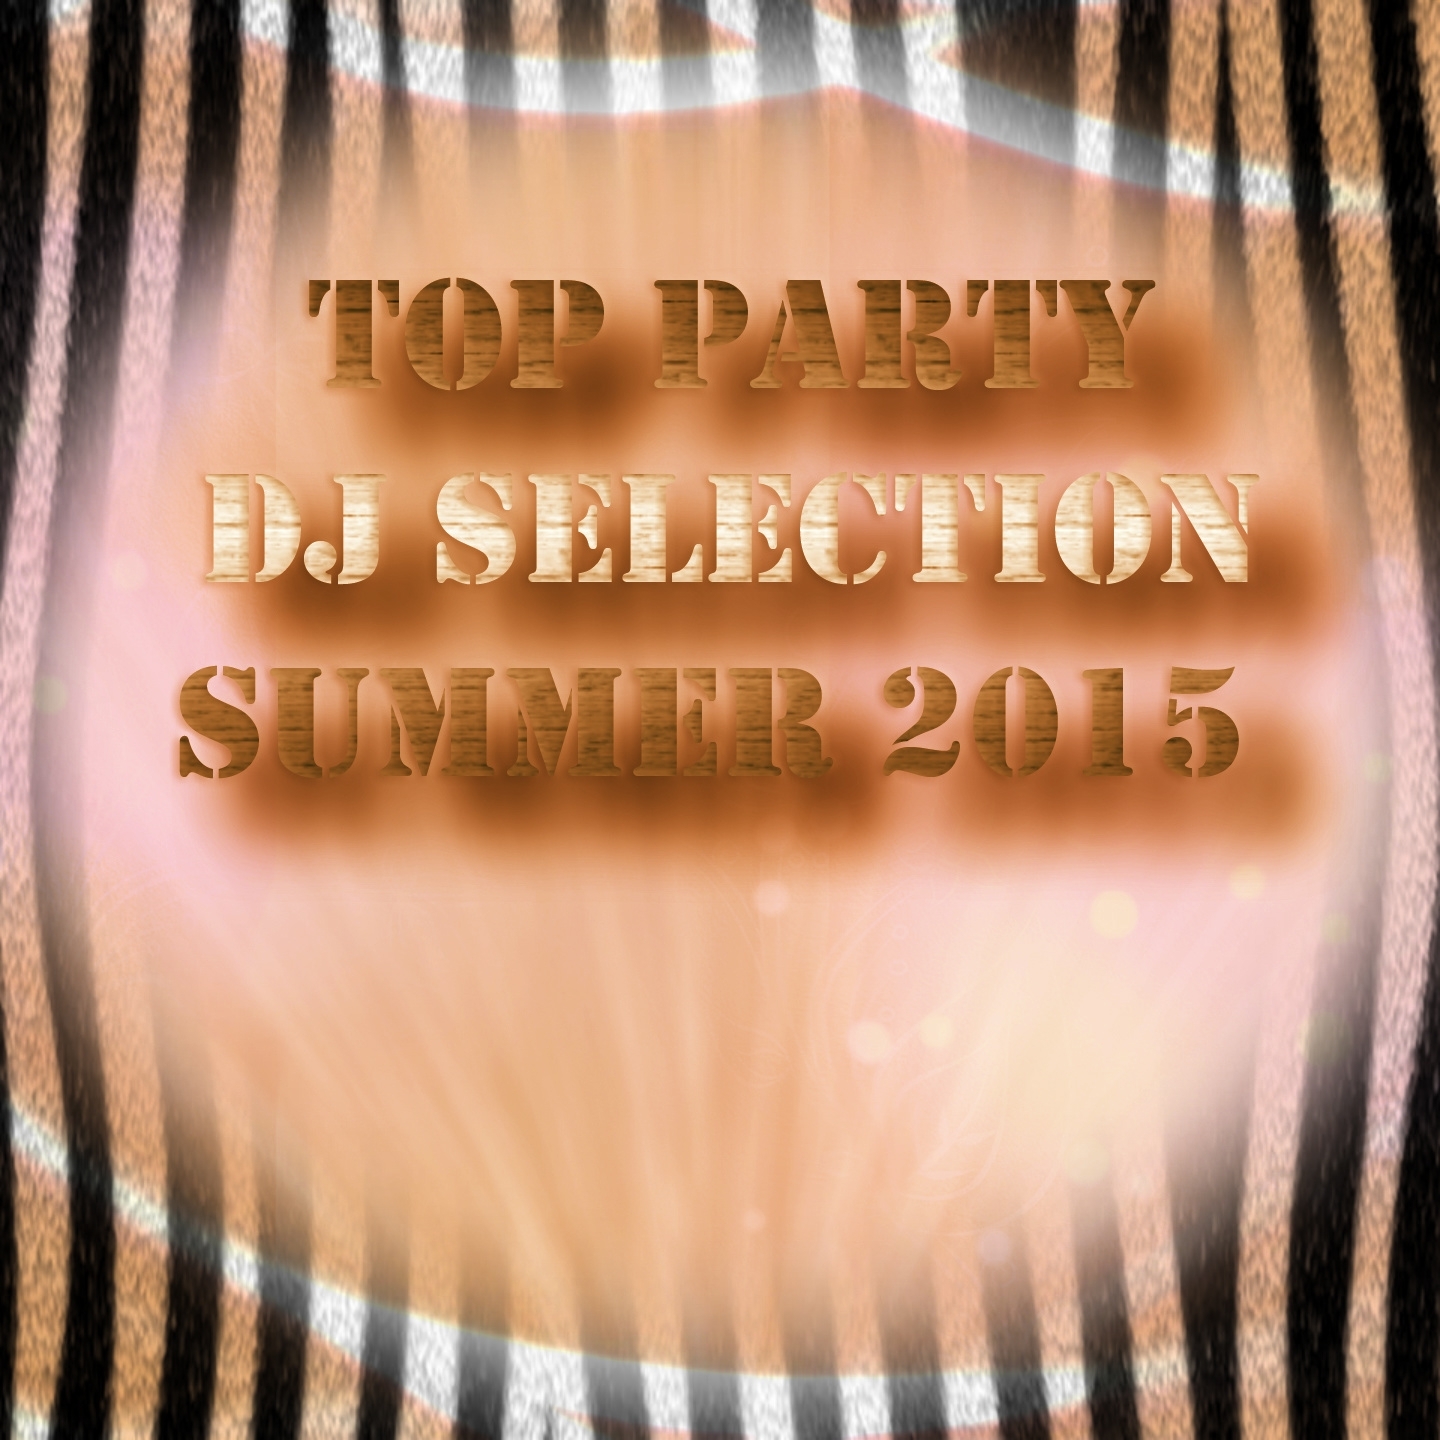 Top Party DJ Selection Summer 2015